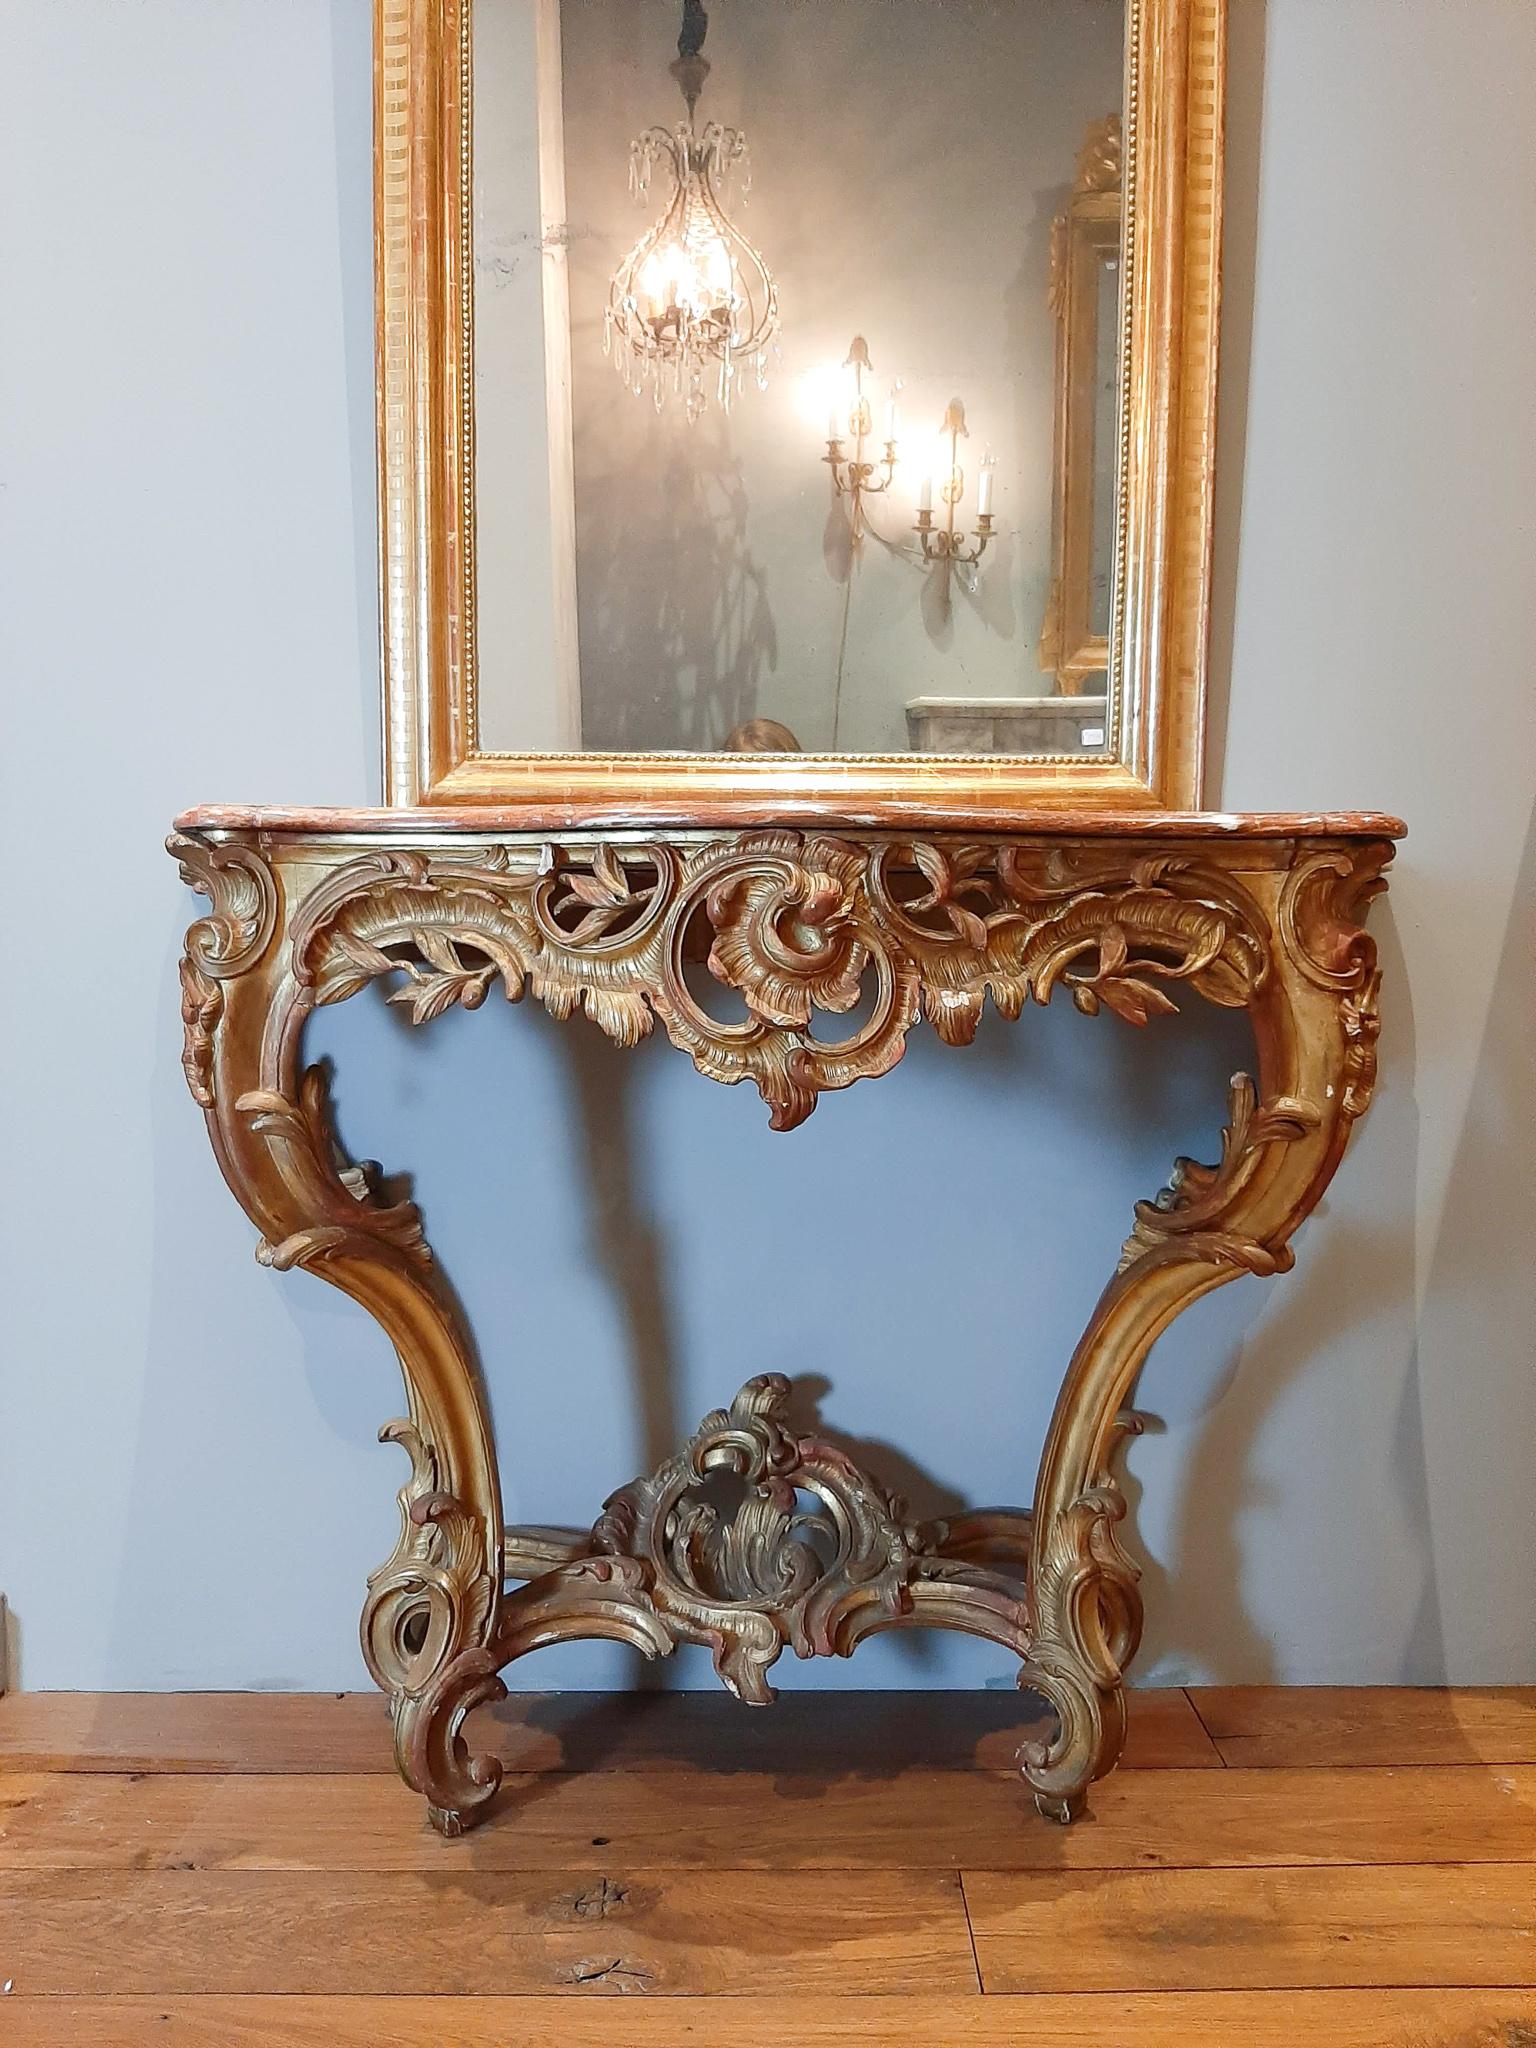 Antique carved and gilded wood console table with red marble top (Incarnat Turquin marble), Rococo, 19th century.

Measures: Height 89 cm x width 124 x depth 53 cm.